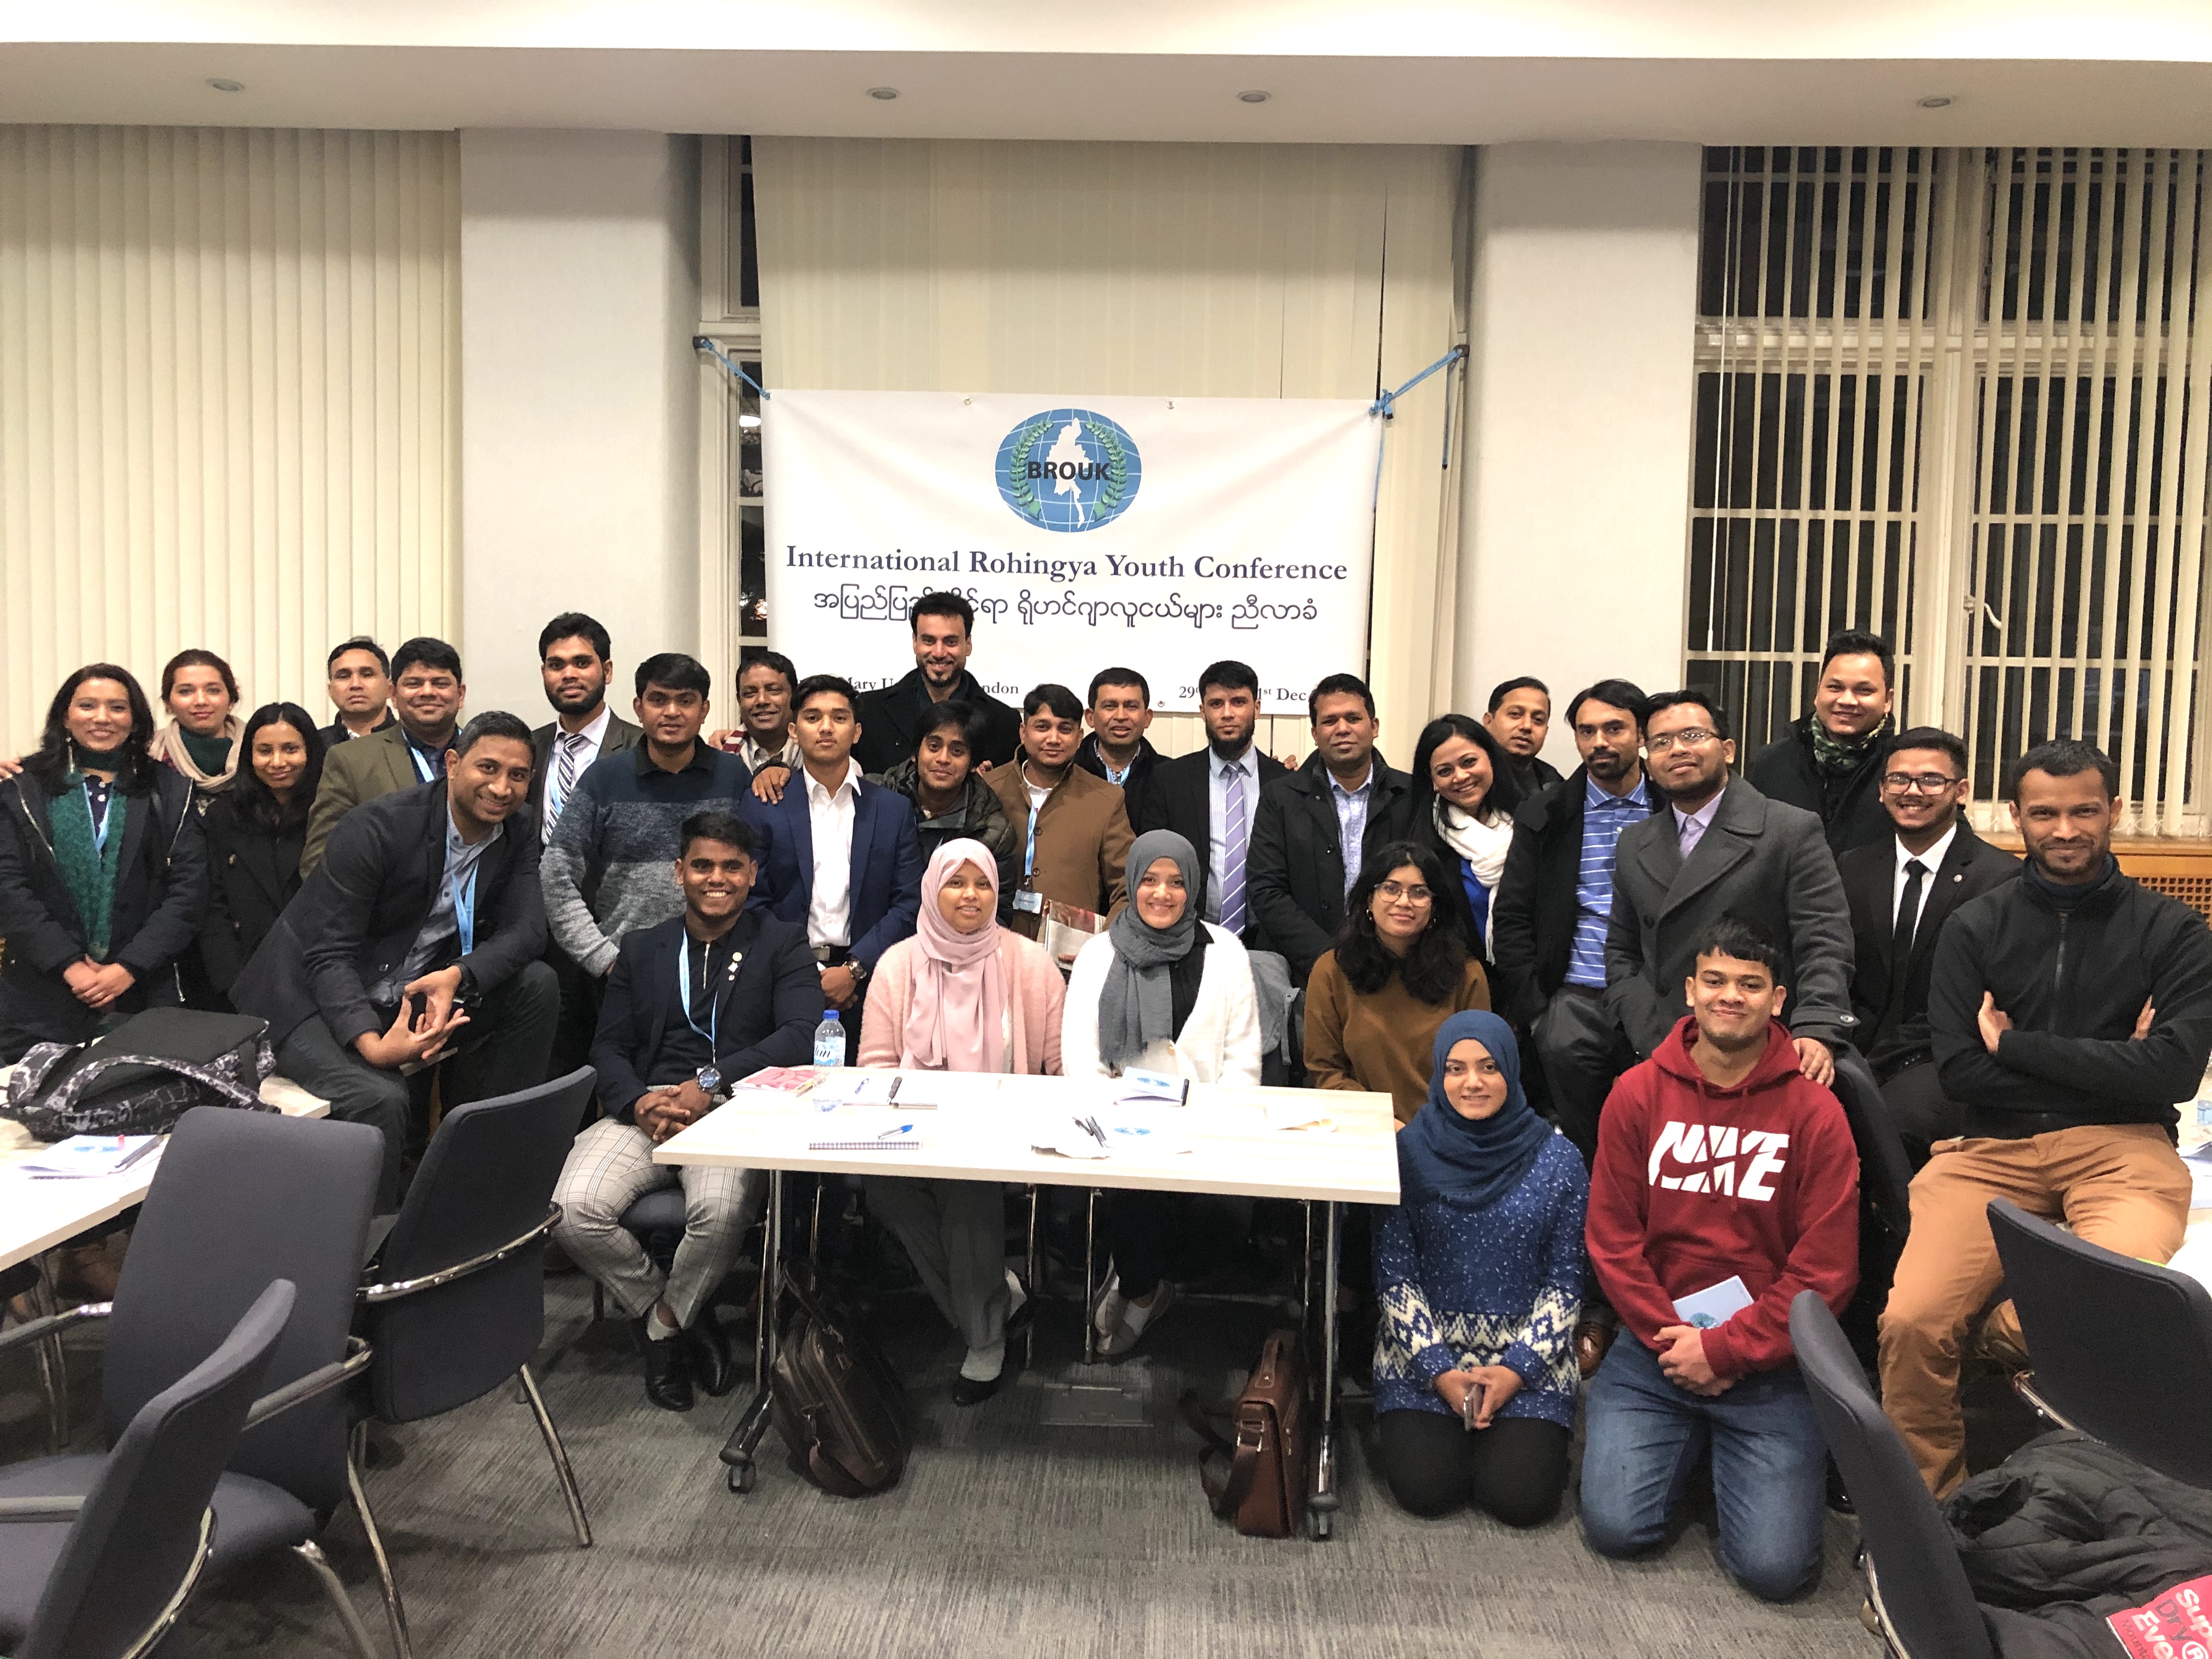 Rohingya Youth Call on the International Community to Act at Landmark Conference